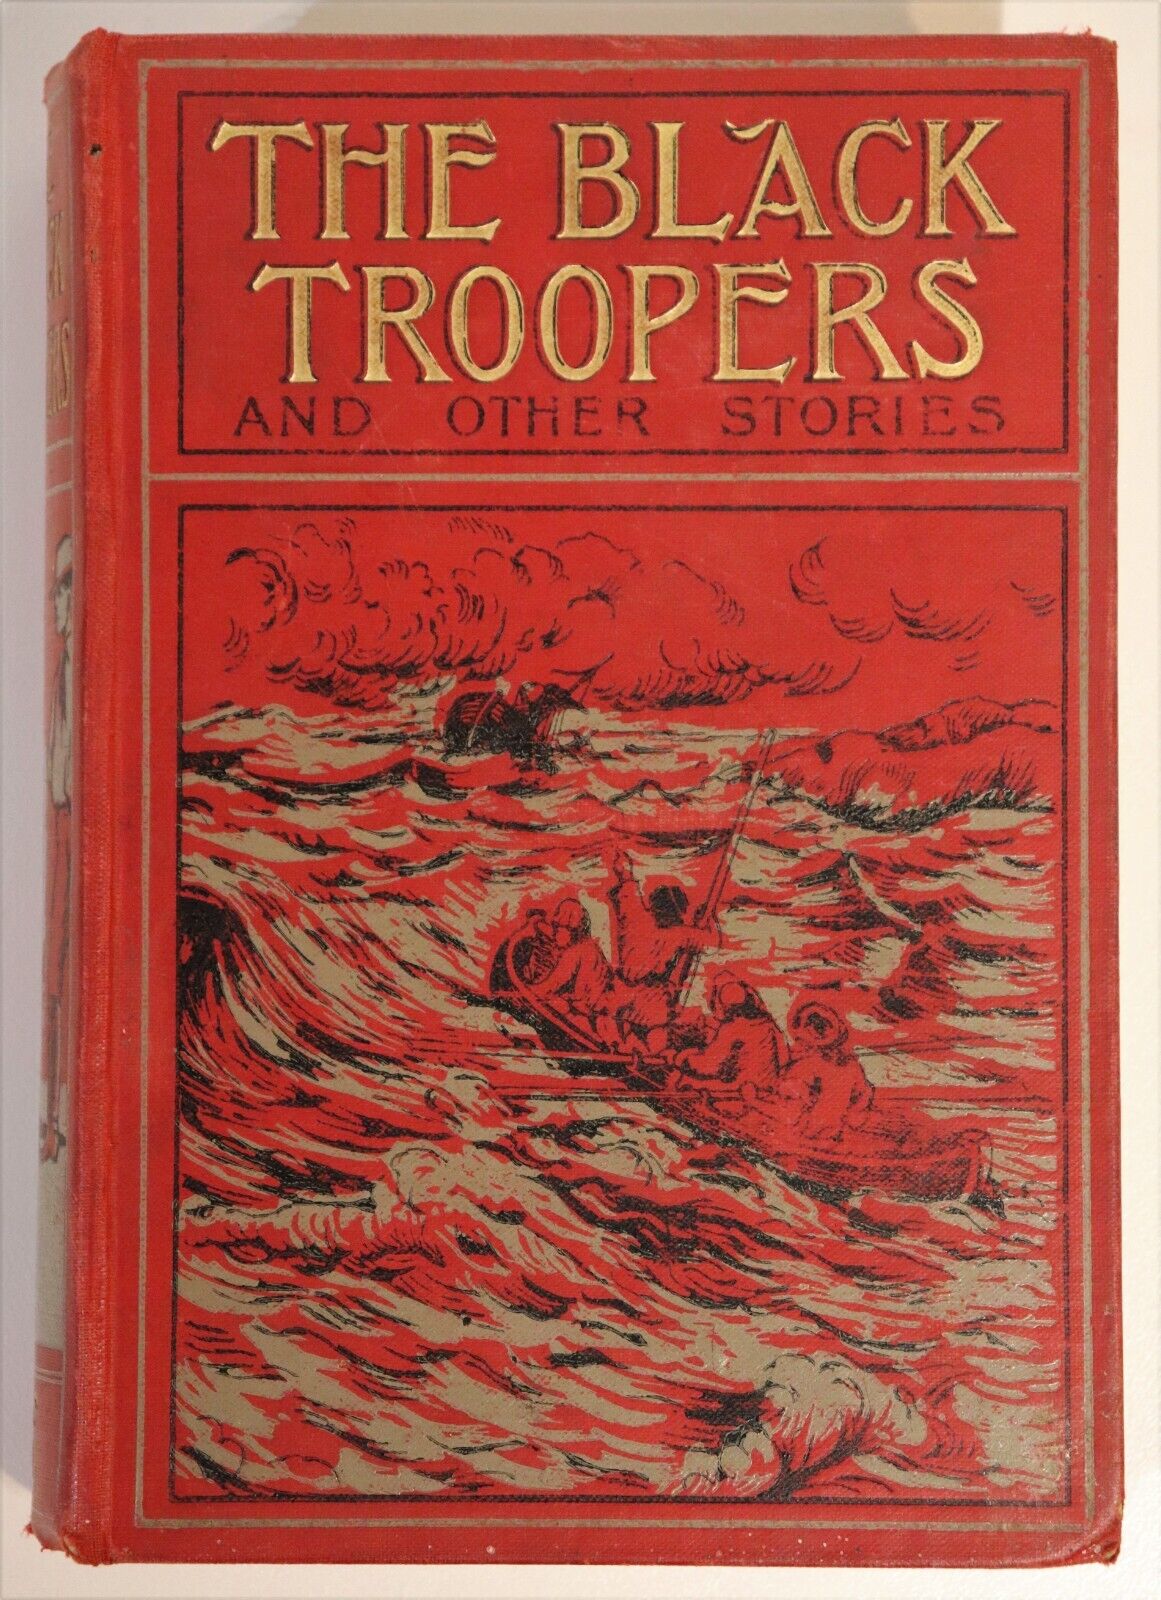 c1910 The Black Troopers & Other Stories Antique Australian Fiction Book